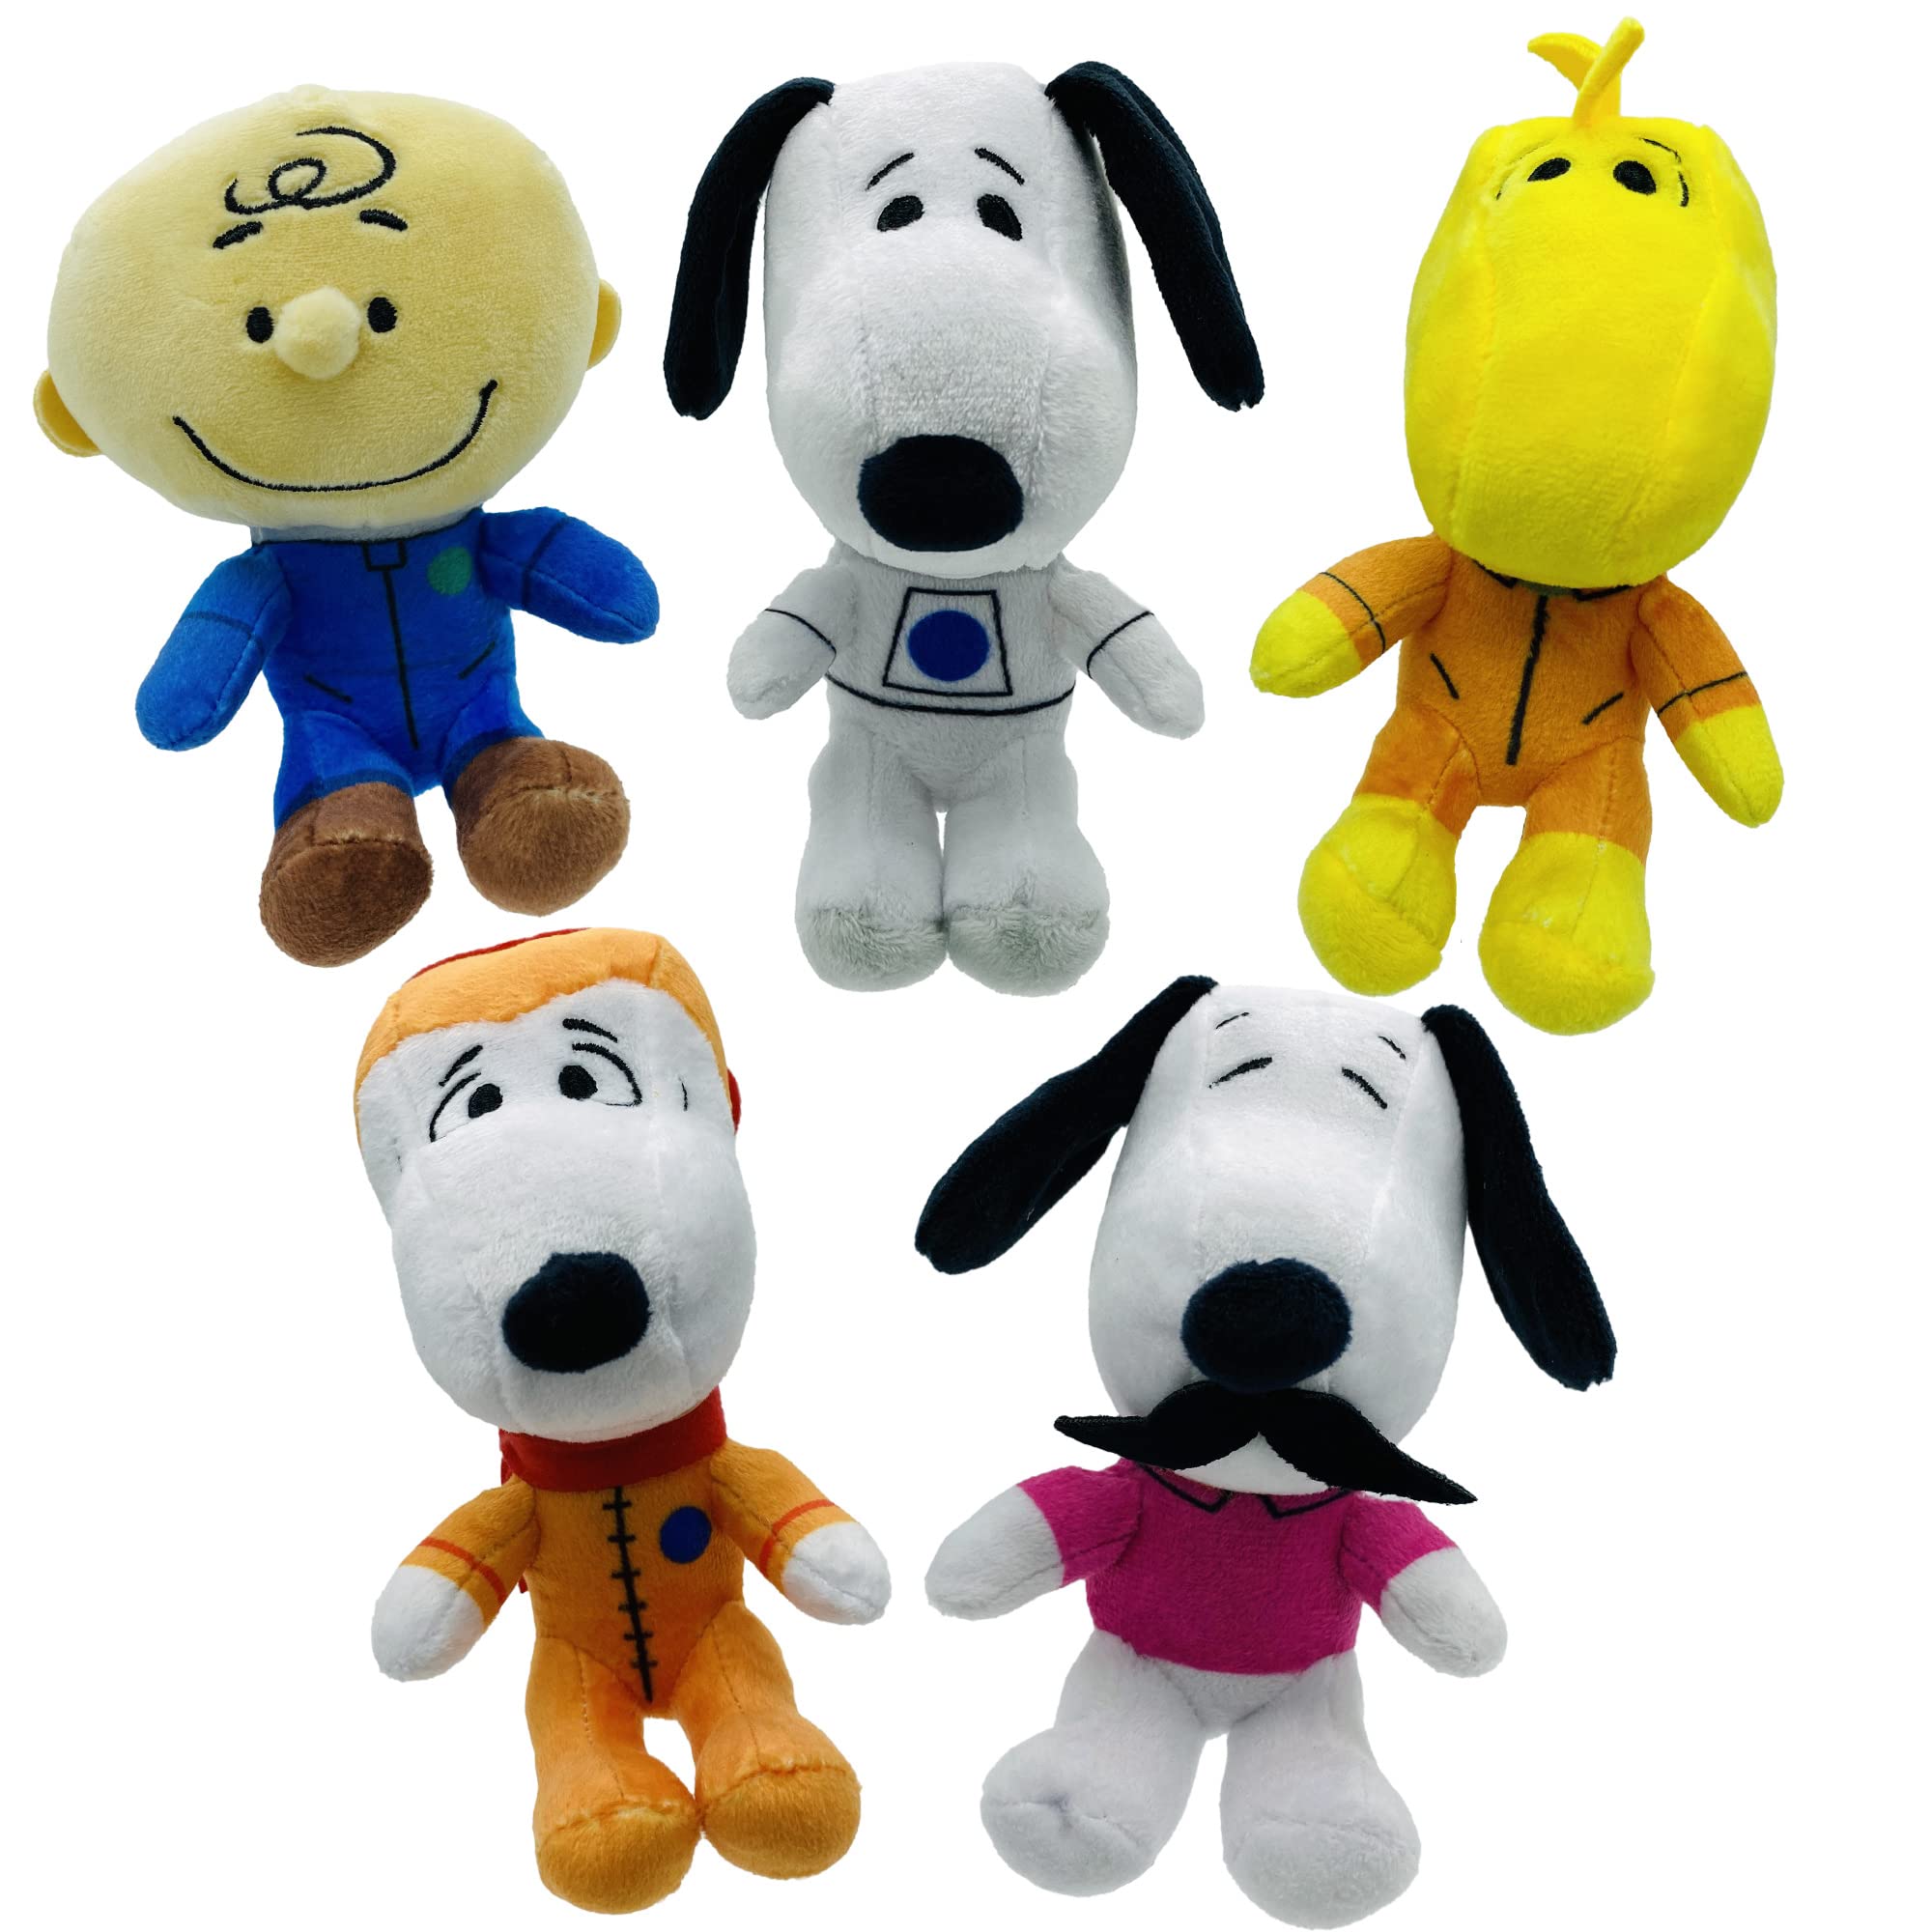 JINX Official Peanuts Collectible Plush Woodstock, Excellent Plushie Toy for Toddlers & Preschool, Super Cute Orange Flight Maverick